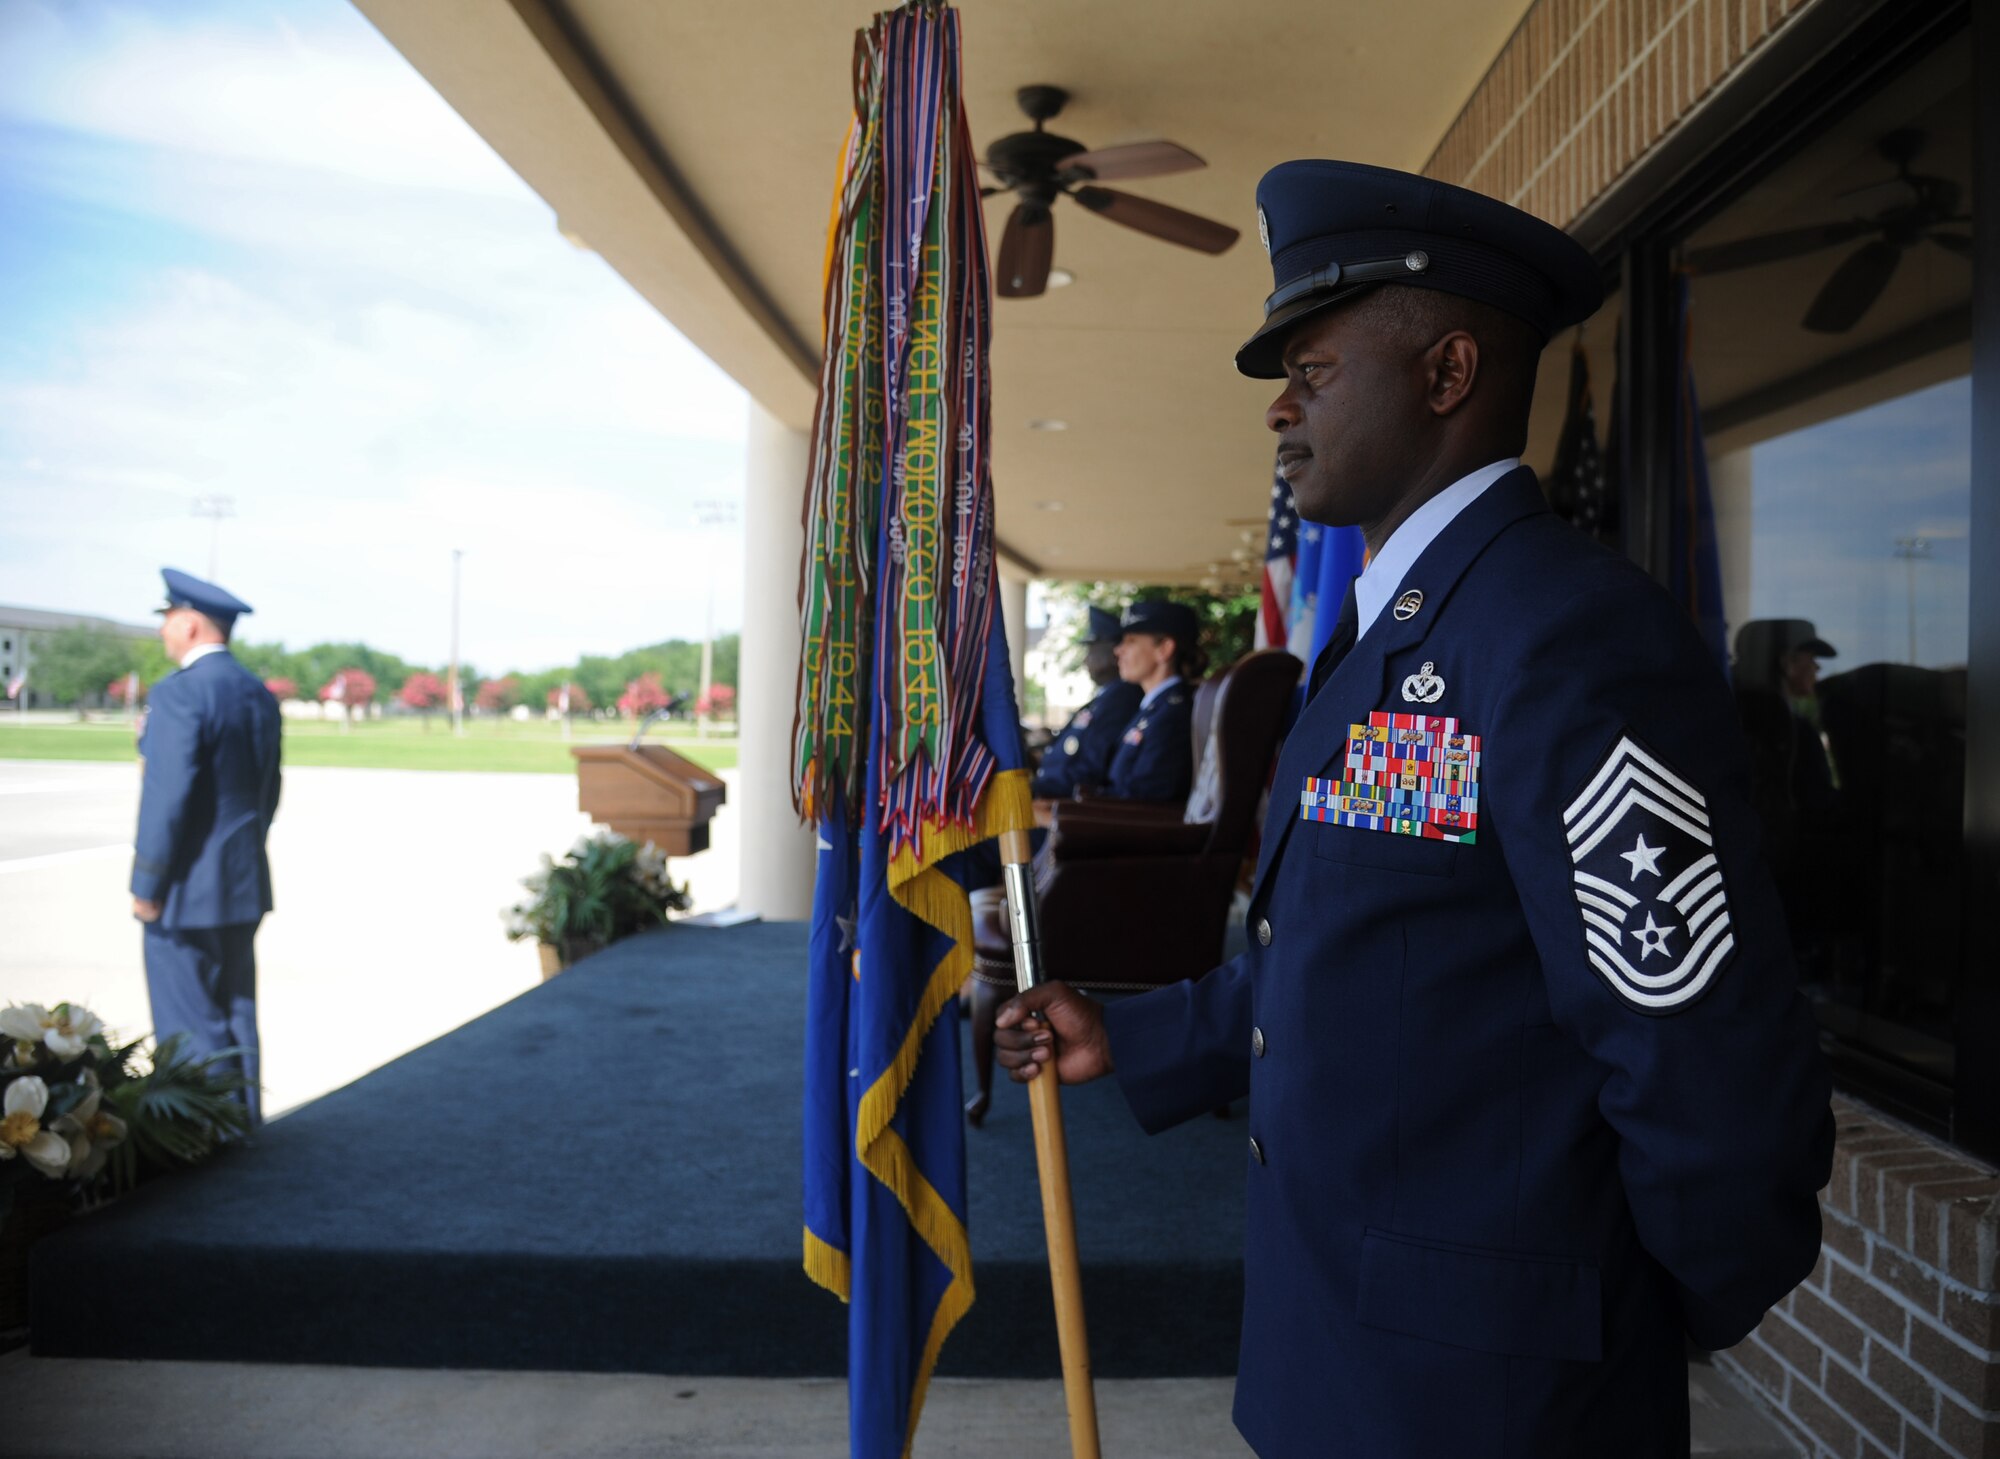 Chief Master Sgt. Harry Hutchinson, 81st Training Wing command chief, holds the guidon during a change of command ceremony, June 26, 2015, Keesler Air Force Base, Miss. The guidon ceremony is a symbol of command being exchanged from one commander to the next. Col. Michele Edmondson took command of the 81st TRW from Brig. Gen. Patrick Higby. (U.S. Air Force photo by Senior Airman Holly Mansfield)